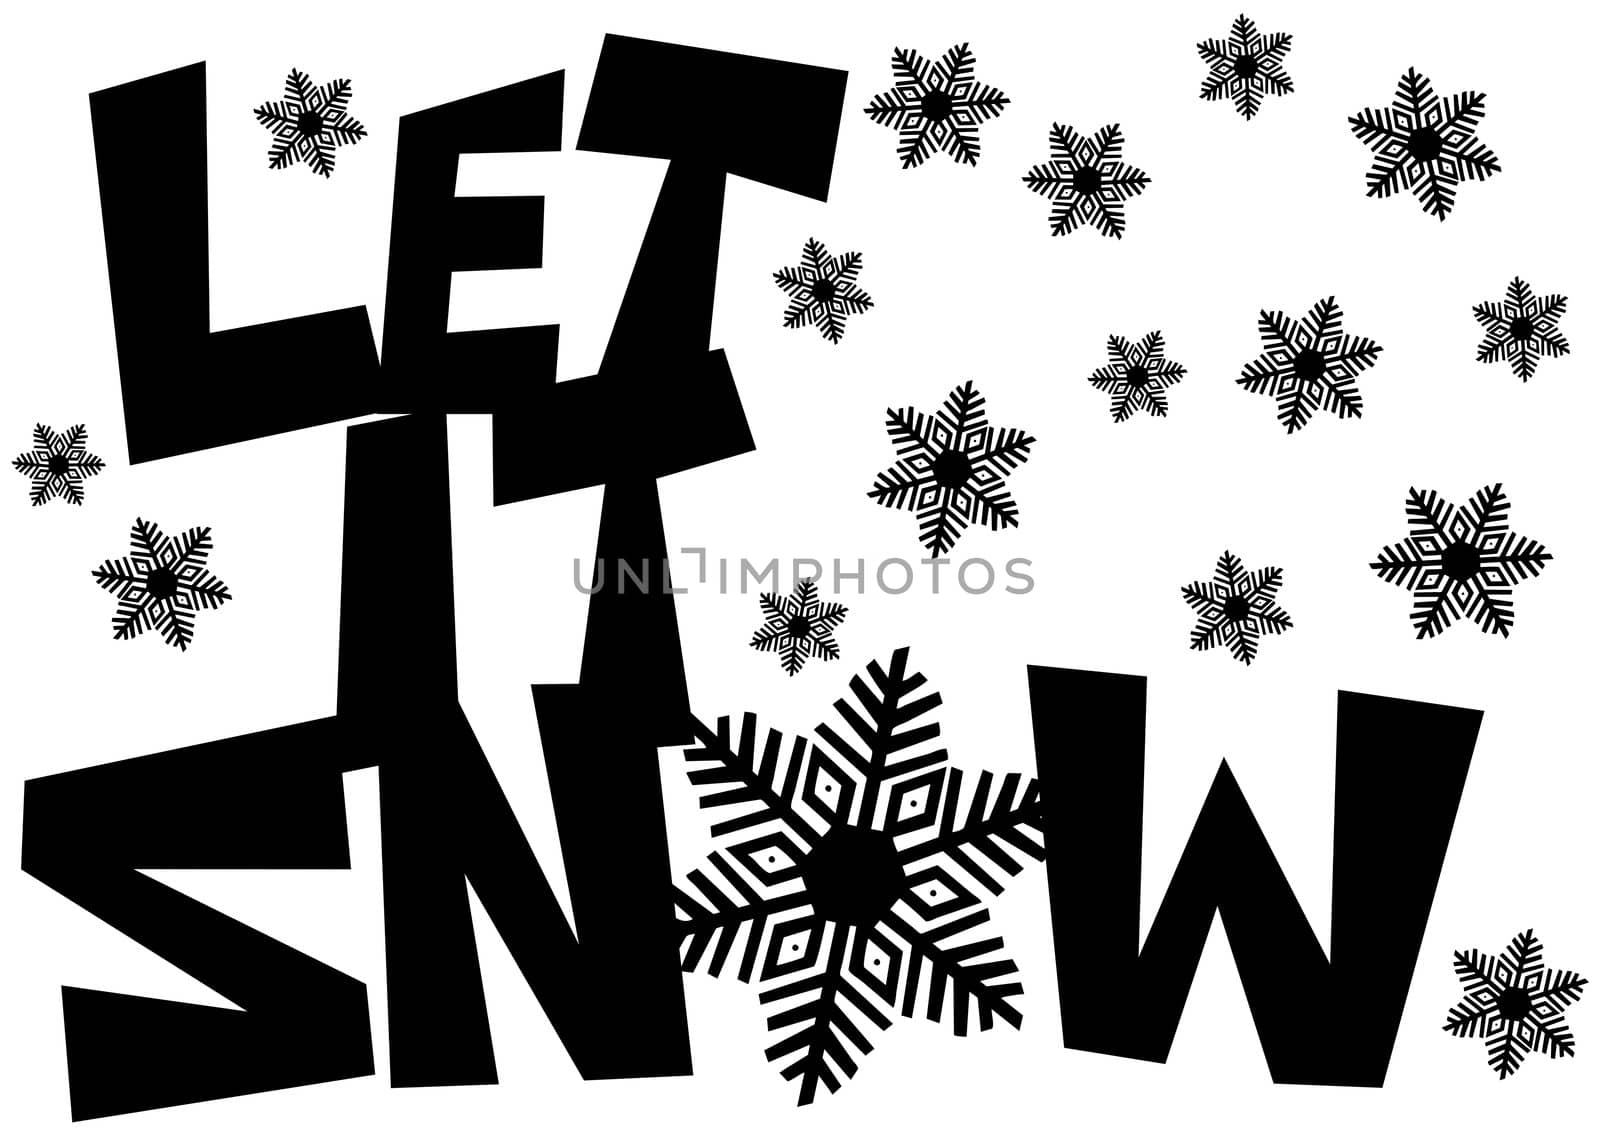 Let It Snow Freehand Drawn Text with Snowflakes by jpldesigns